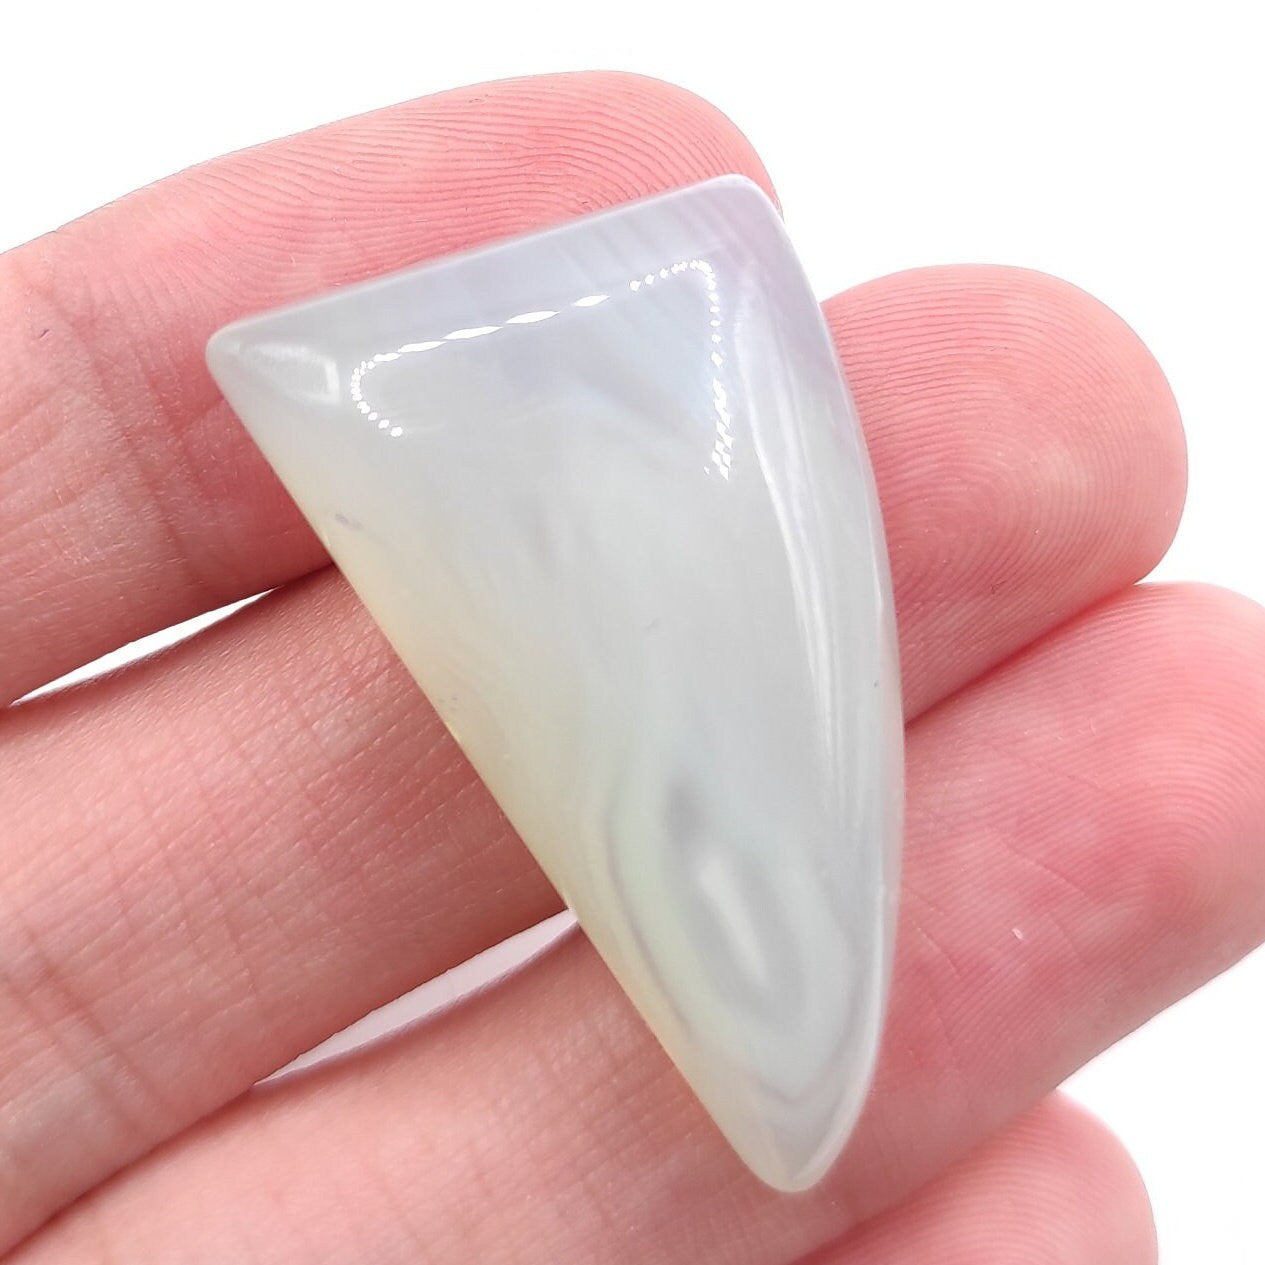 44ct Opalite Cabochon - Manmade Opal Cabochon - Triangle Shaped Cabochon - Polished White Opalite - Synthetic Opal